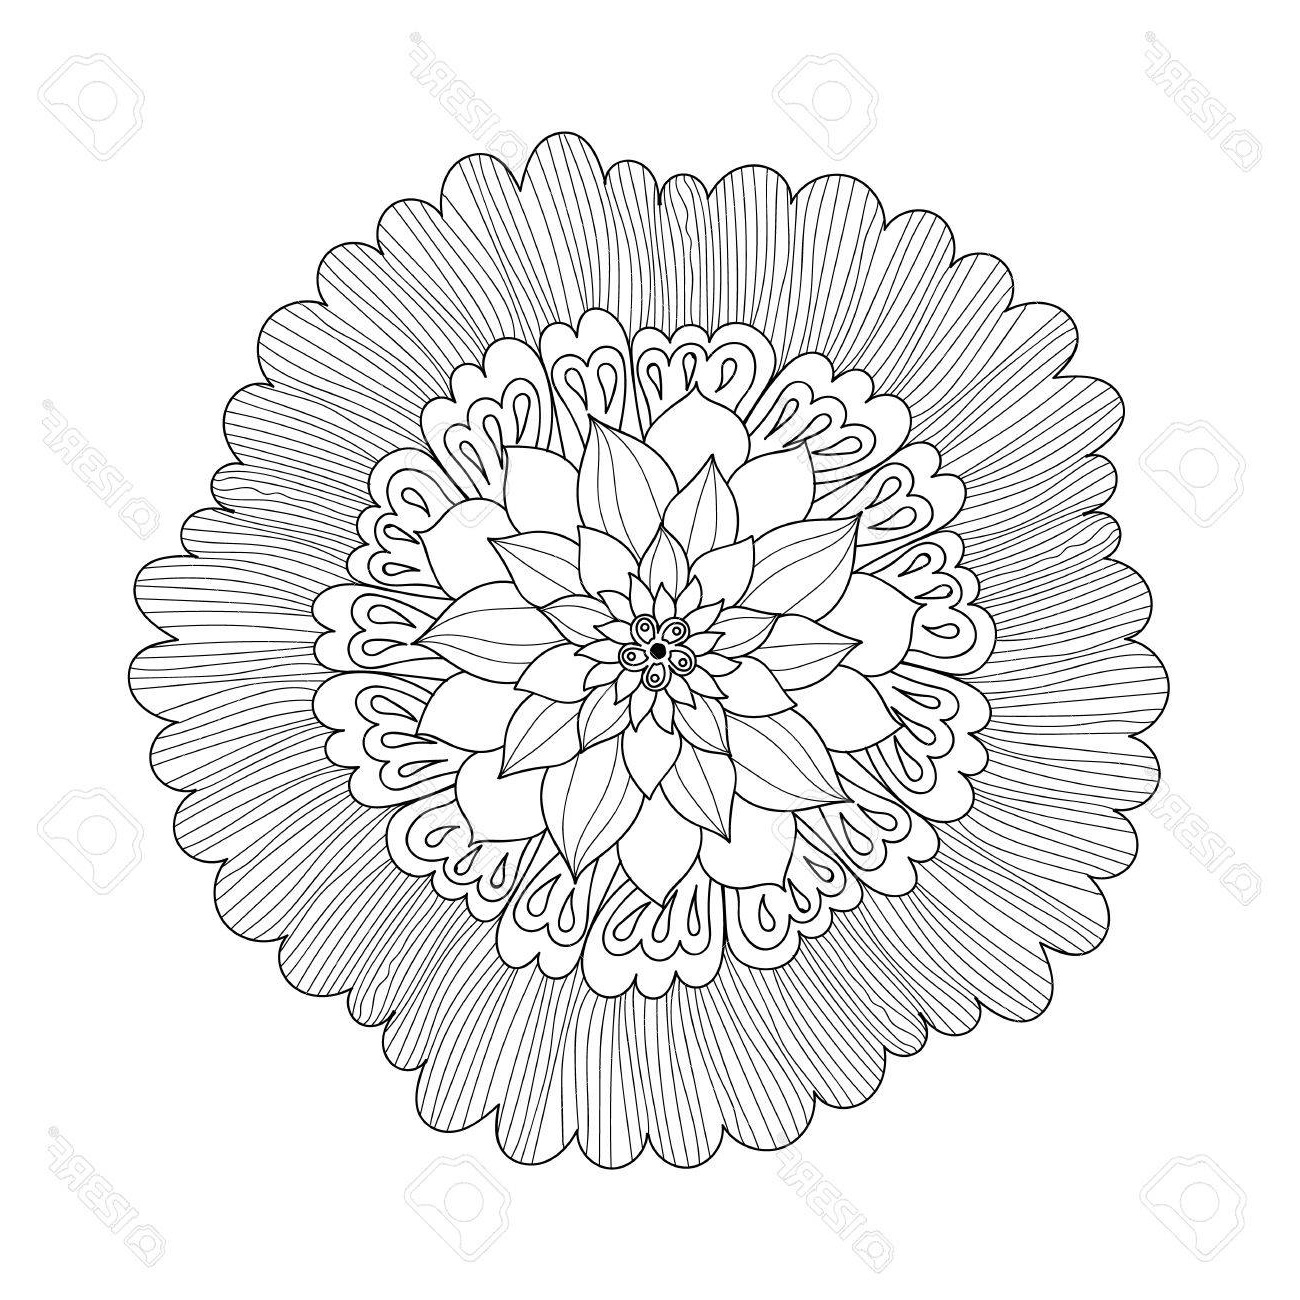 Coloriage Rond Cool Images 70 Rond Coloriage